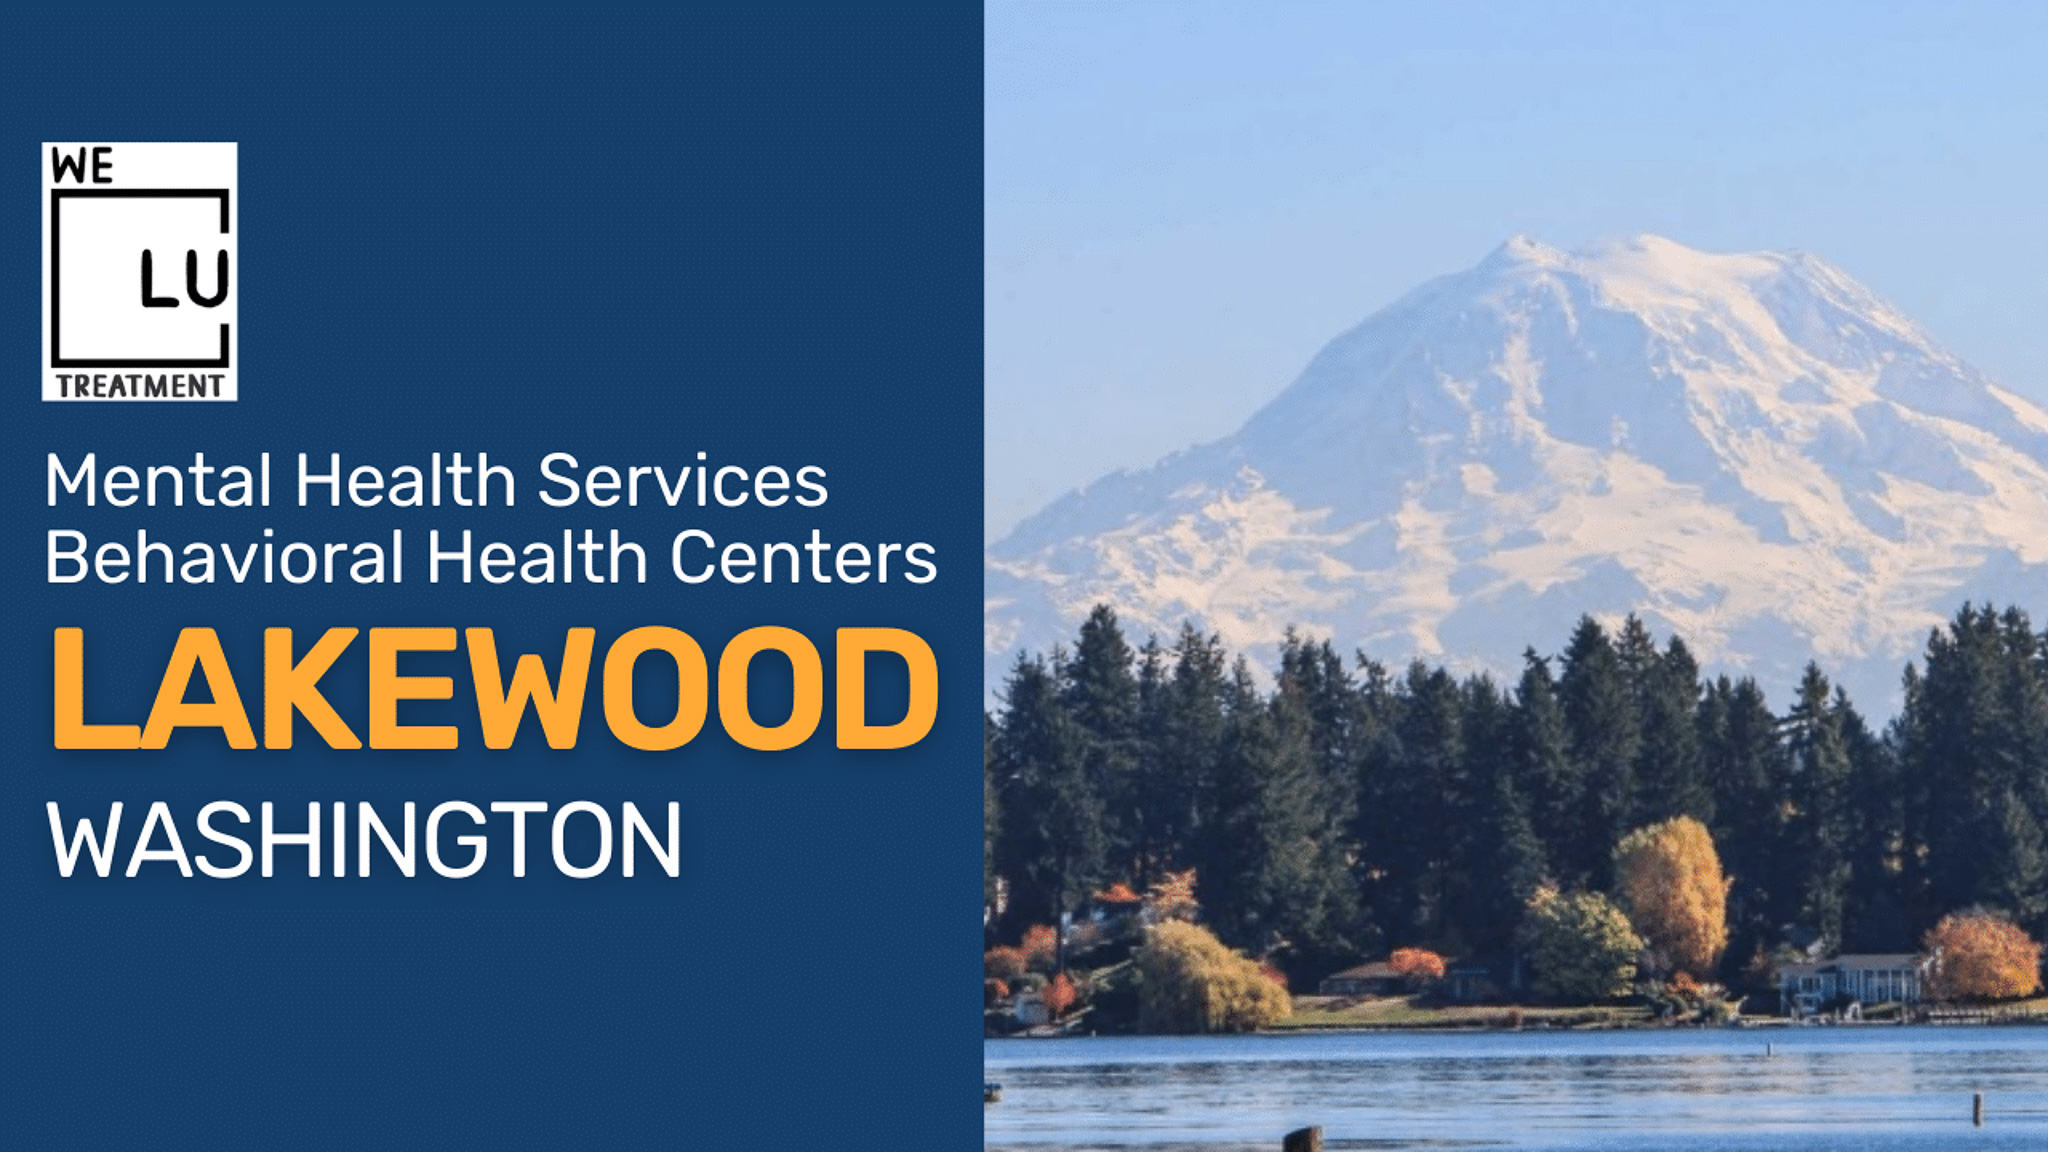 Lakewood WA We Level Up treatment center for drug and alcohol rehab detox and mental health services - Image 1